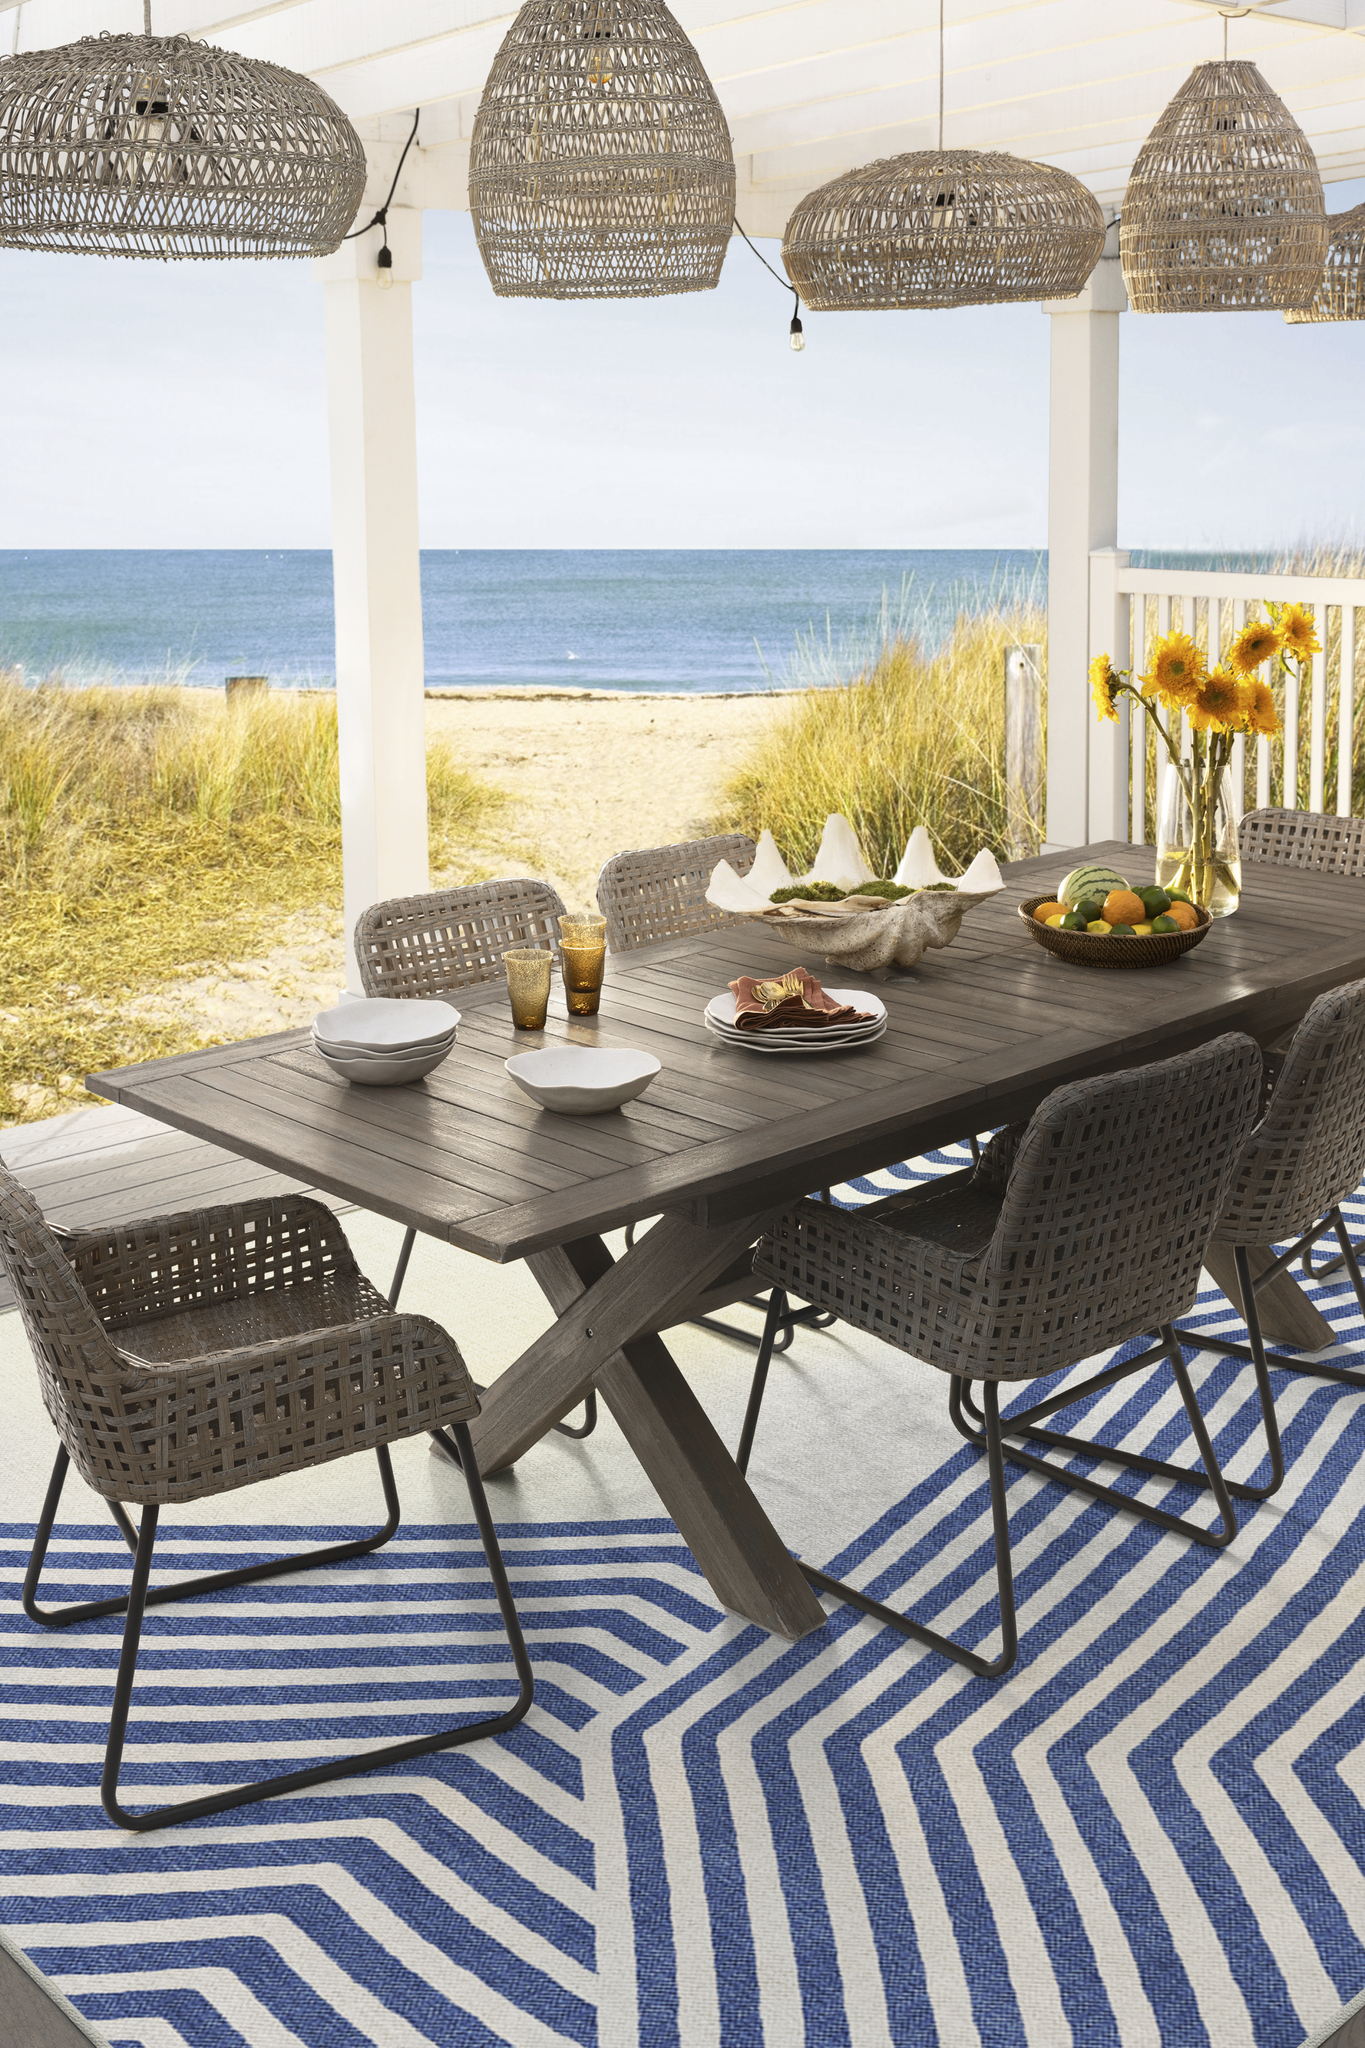 Shop Ruggable's New Collection of Outdoor Washable Rugs